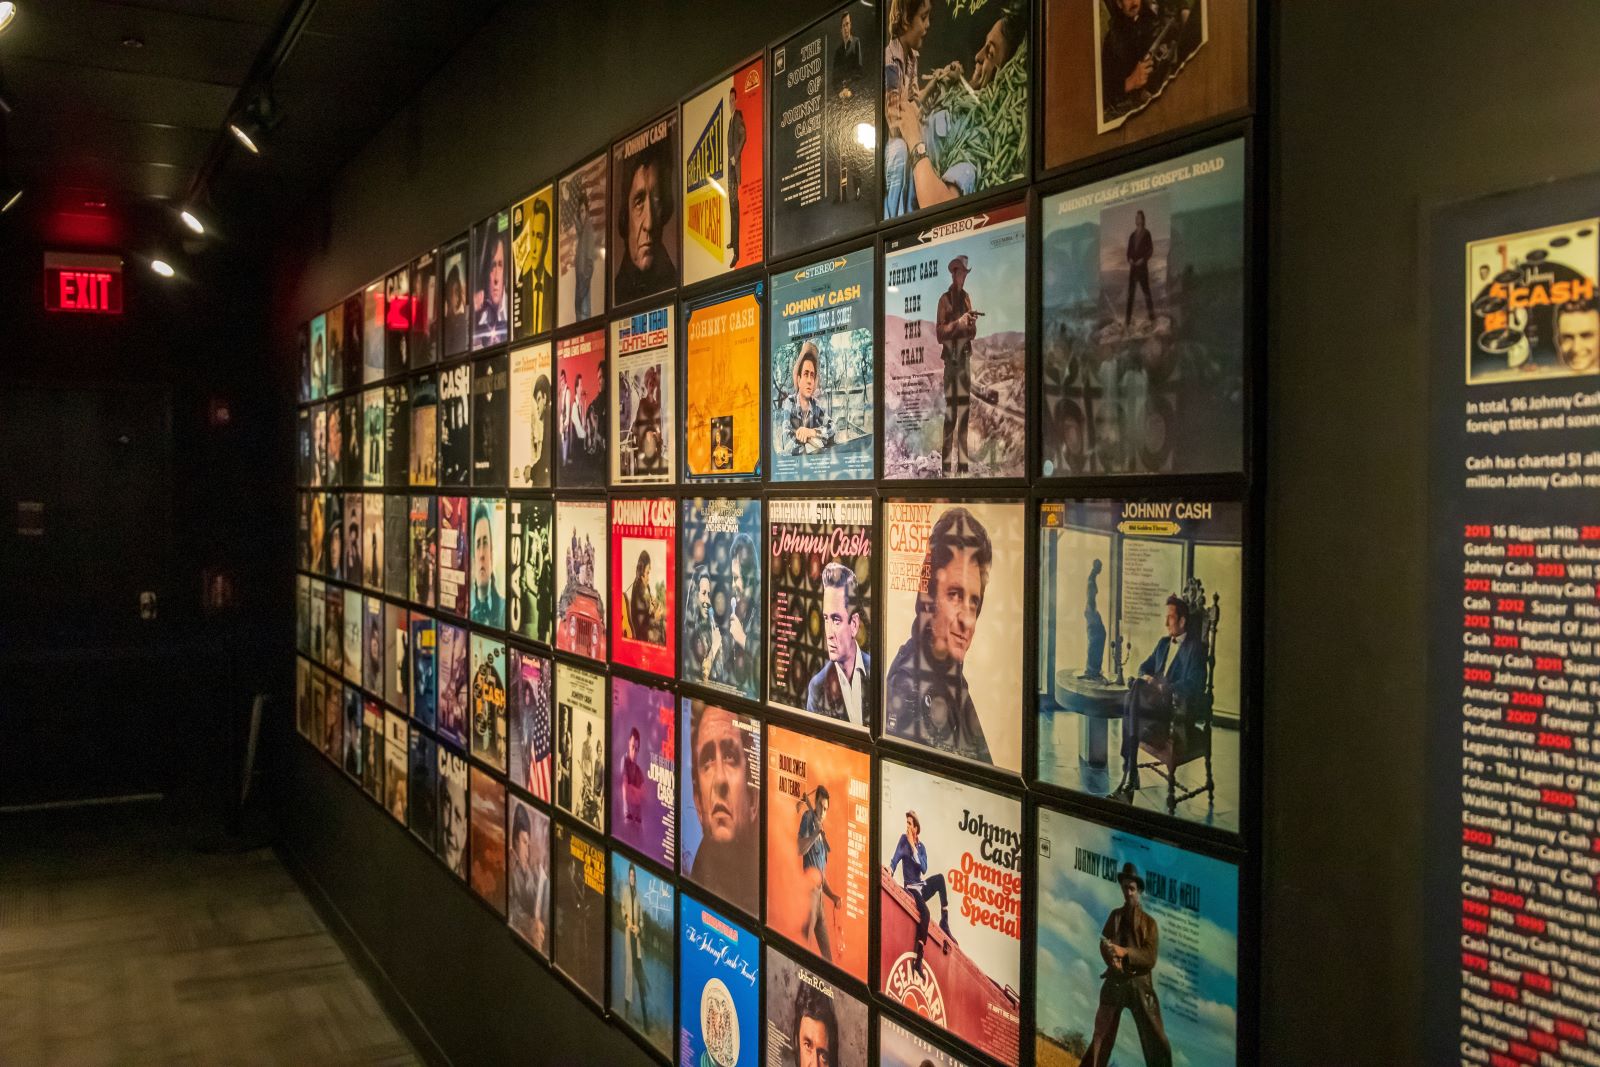 <p class="wp-caption-text">Image Credit: Shutterstock / Marcus E Jones</p>  <p>Pay homage to the Man in Black at the Johnny Cash Museum. This immersive museum features artifacts, interactive exhibits, and rare memorabilia that celebrate the life and legacy of one of country music’s most iconic figures.</p>